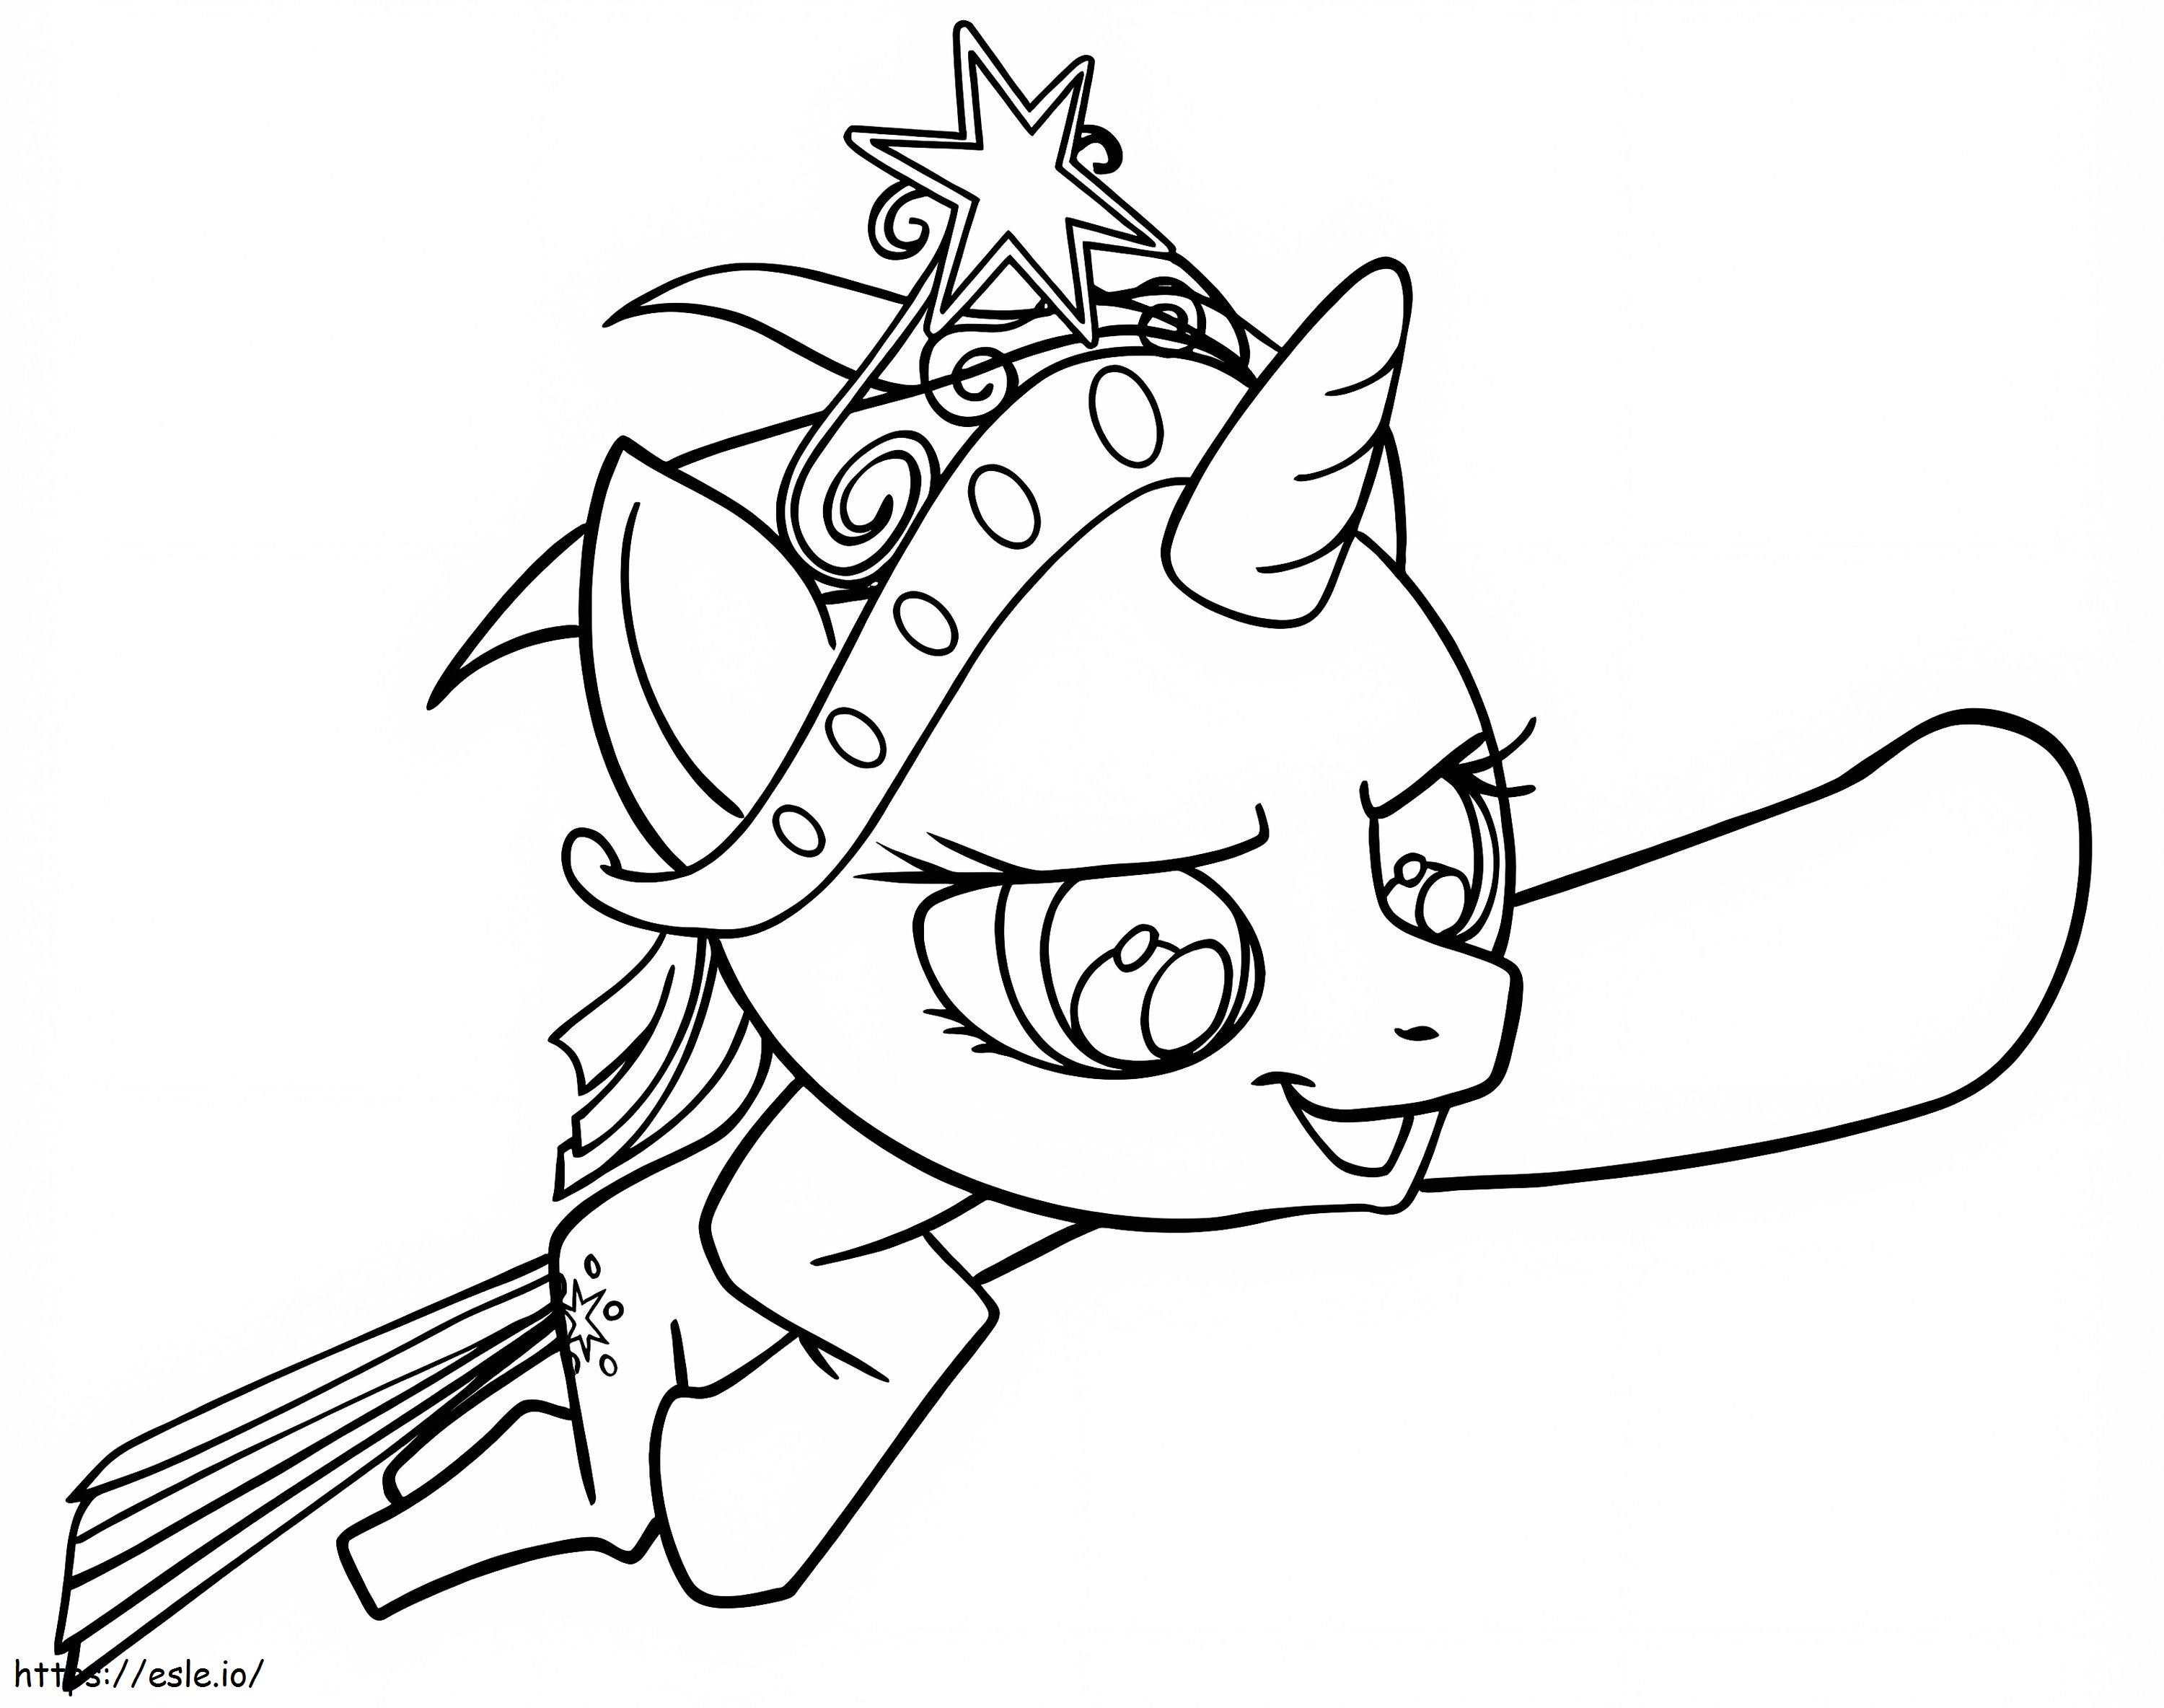 Awesome Twilight Sparkle coloring page